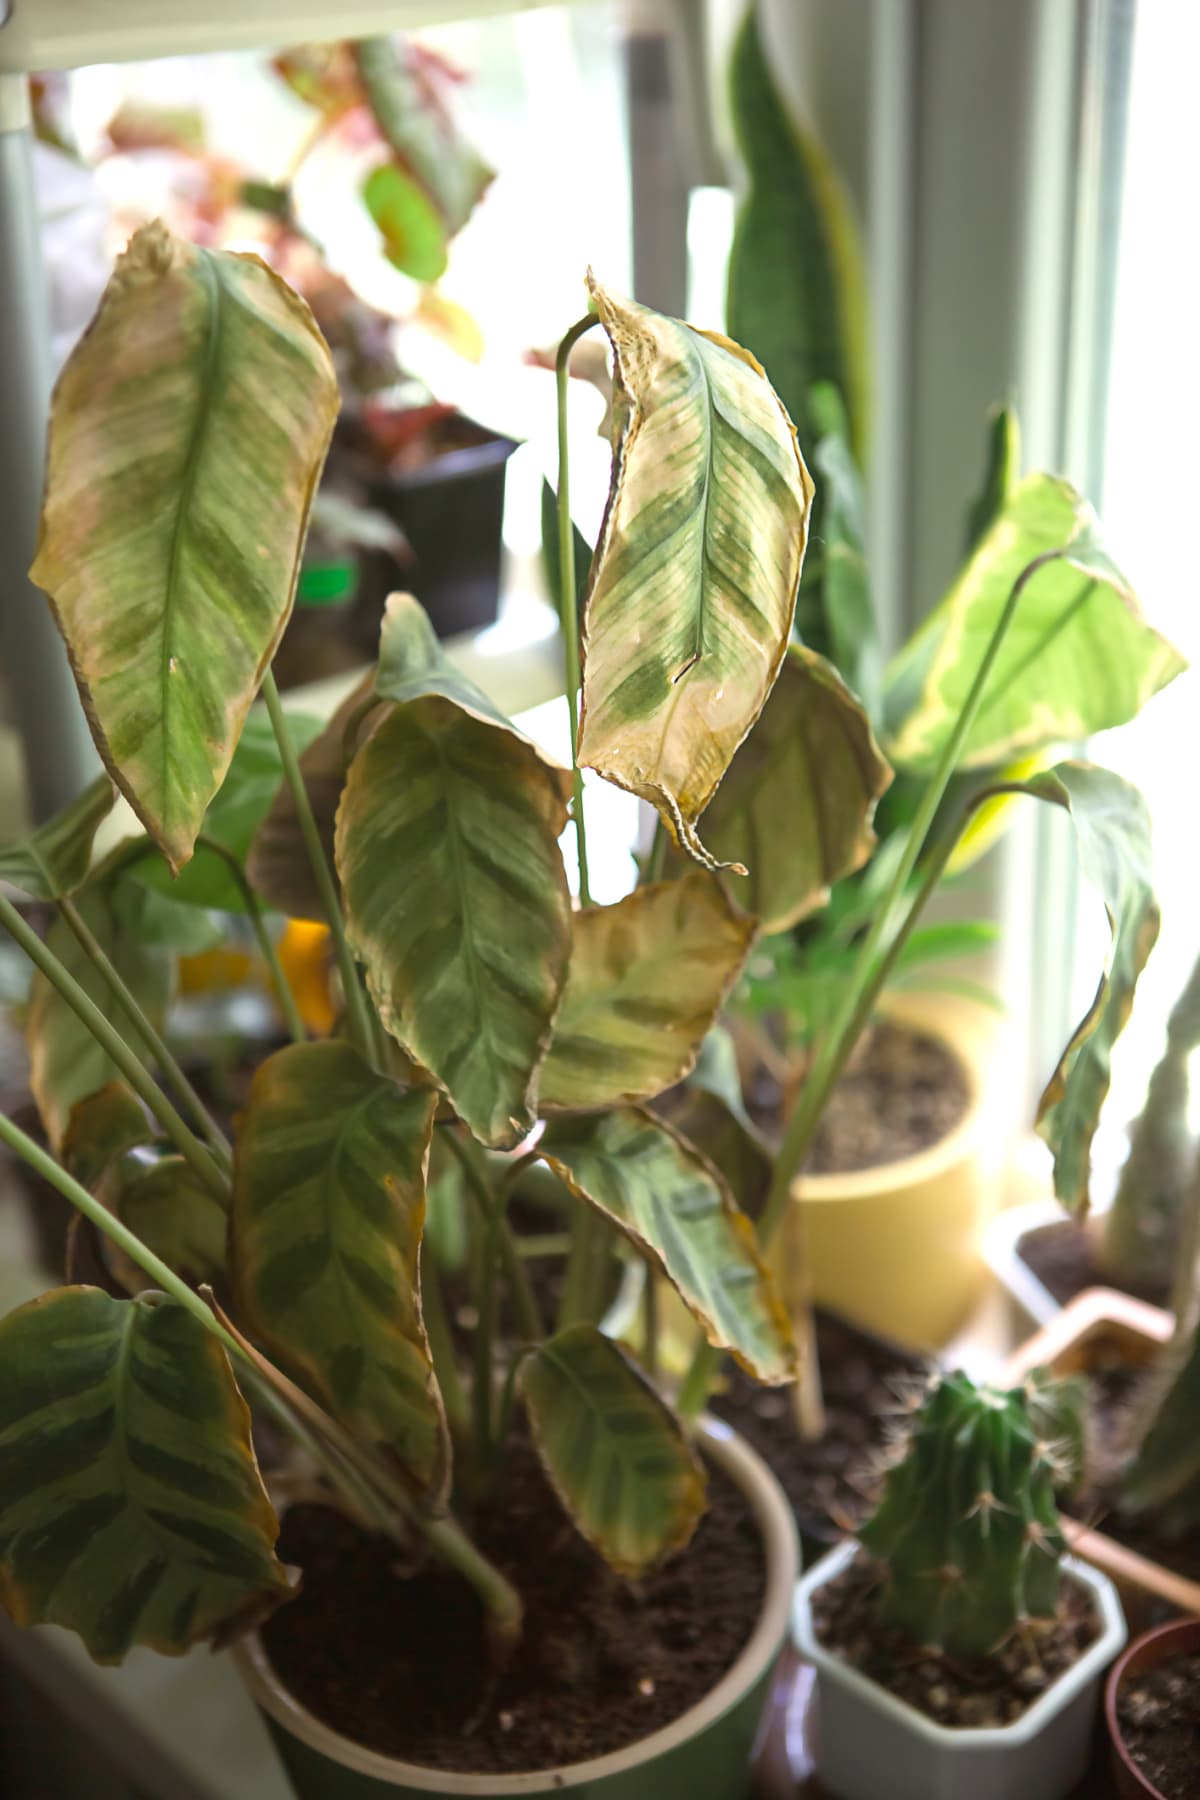 Calathea leaves yellowing due to spider mites.